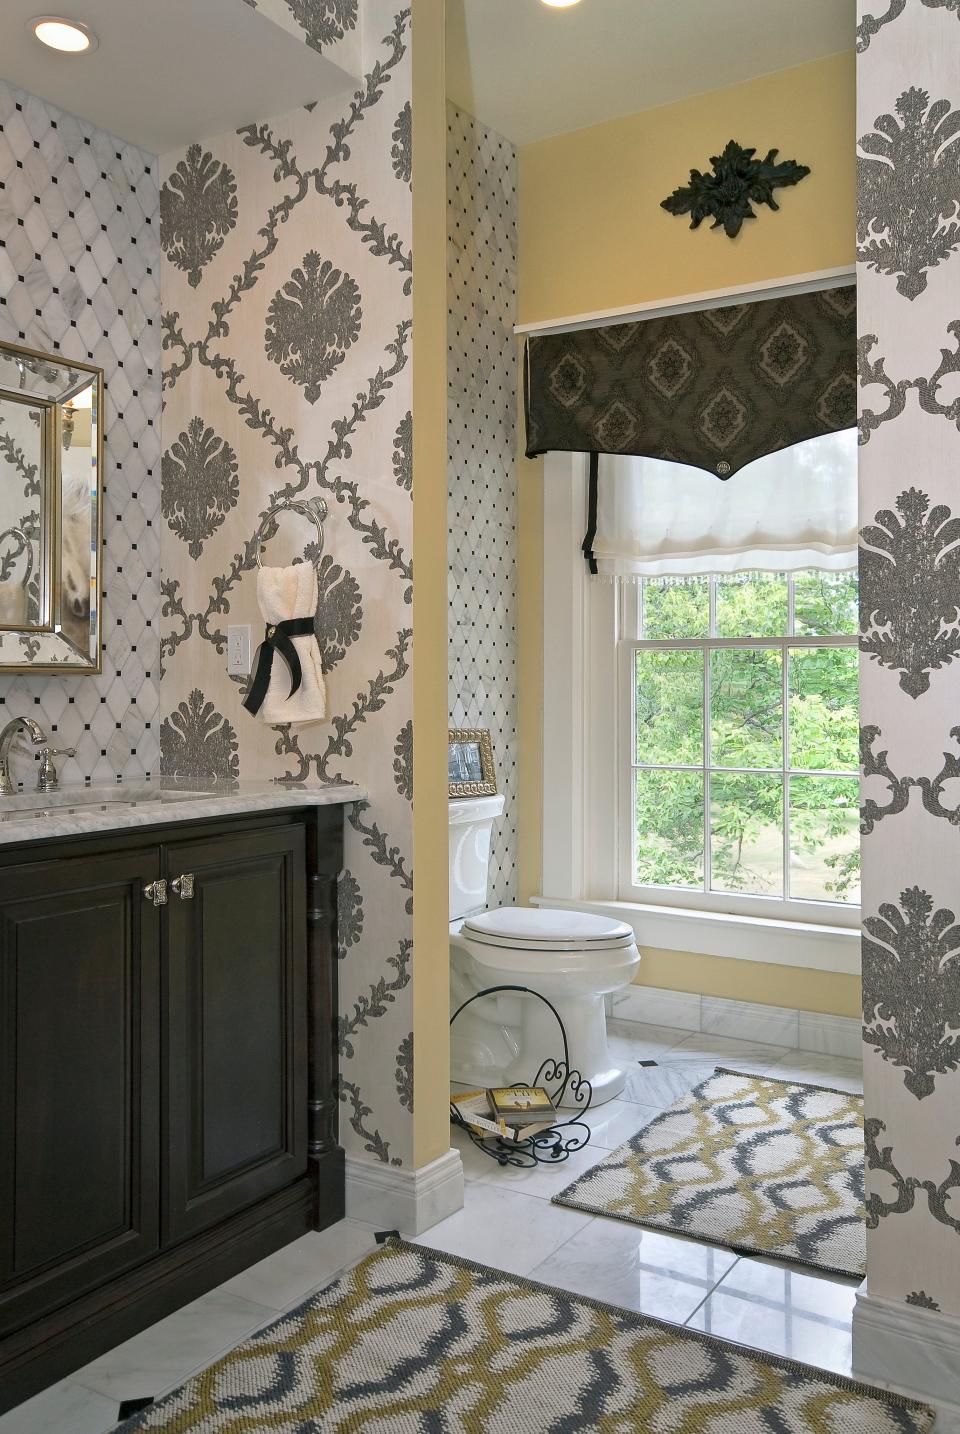 A warm, butter-gold hue complements the patterned wallpaper.